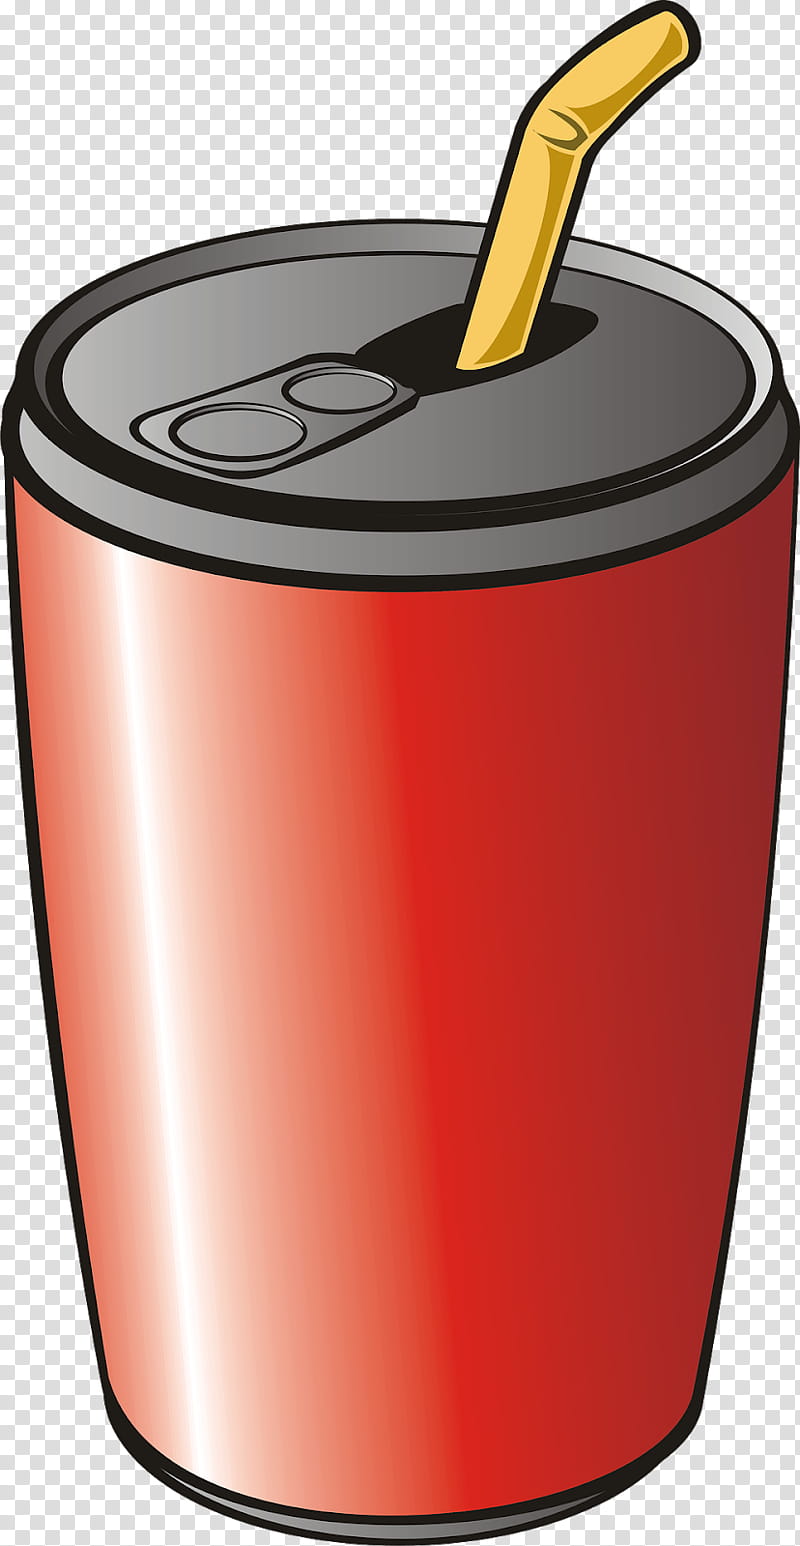 Straw, Cola, Fizzy Drinks, Drawing, Cocacola, Drinking Straw, Drink Can, Cylinder transparent background PNG clipart